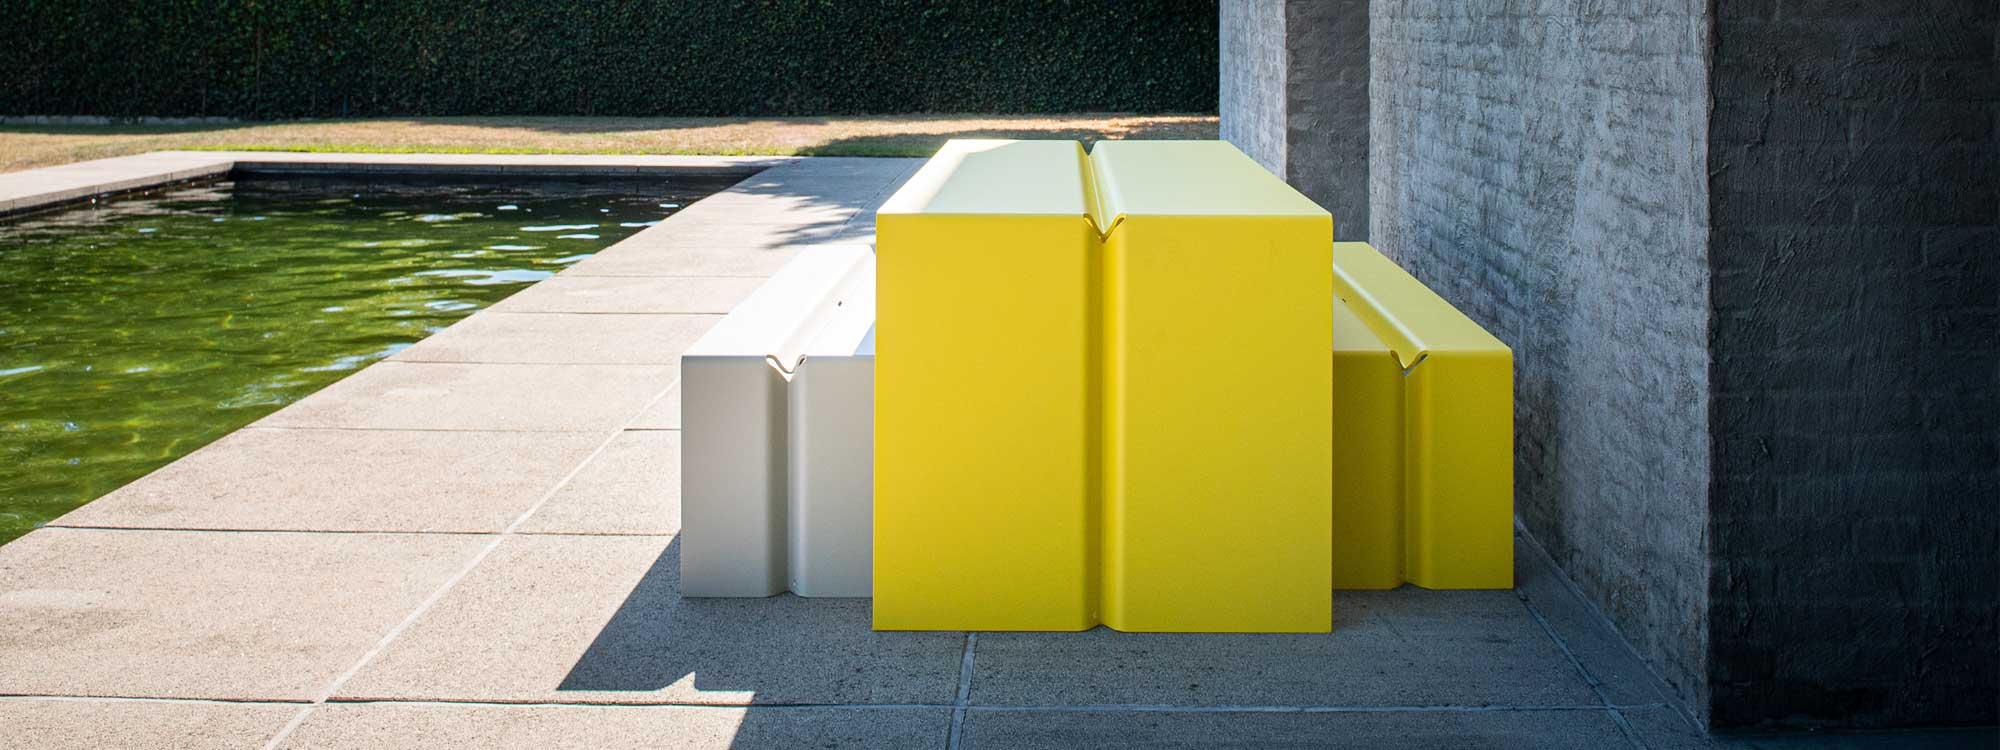 Image of Wünder's The Bended contemporary yellow garden table and white and yellow bench seats in shaped aluminium, shown in courtyard next to peaceful water feature